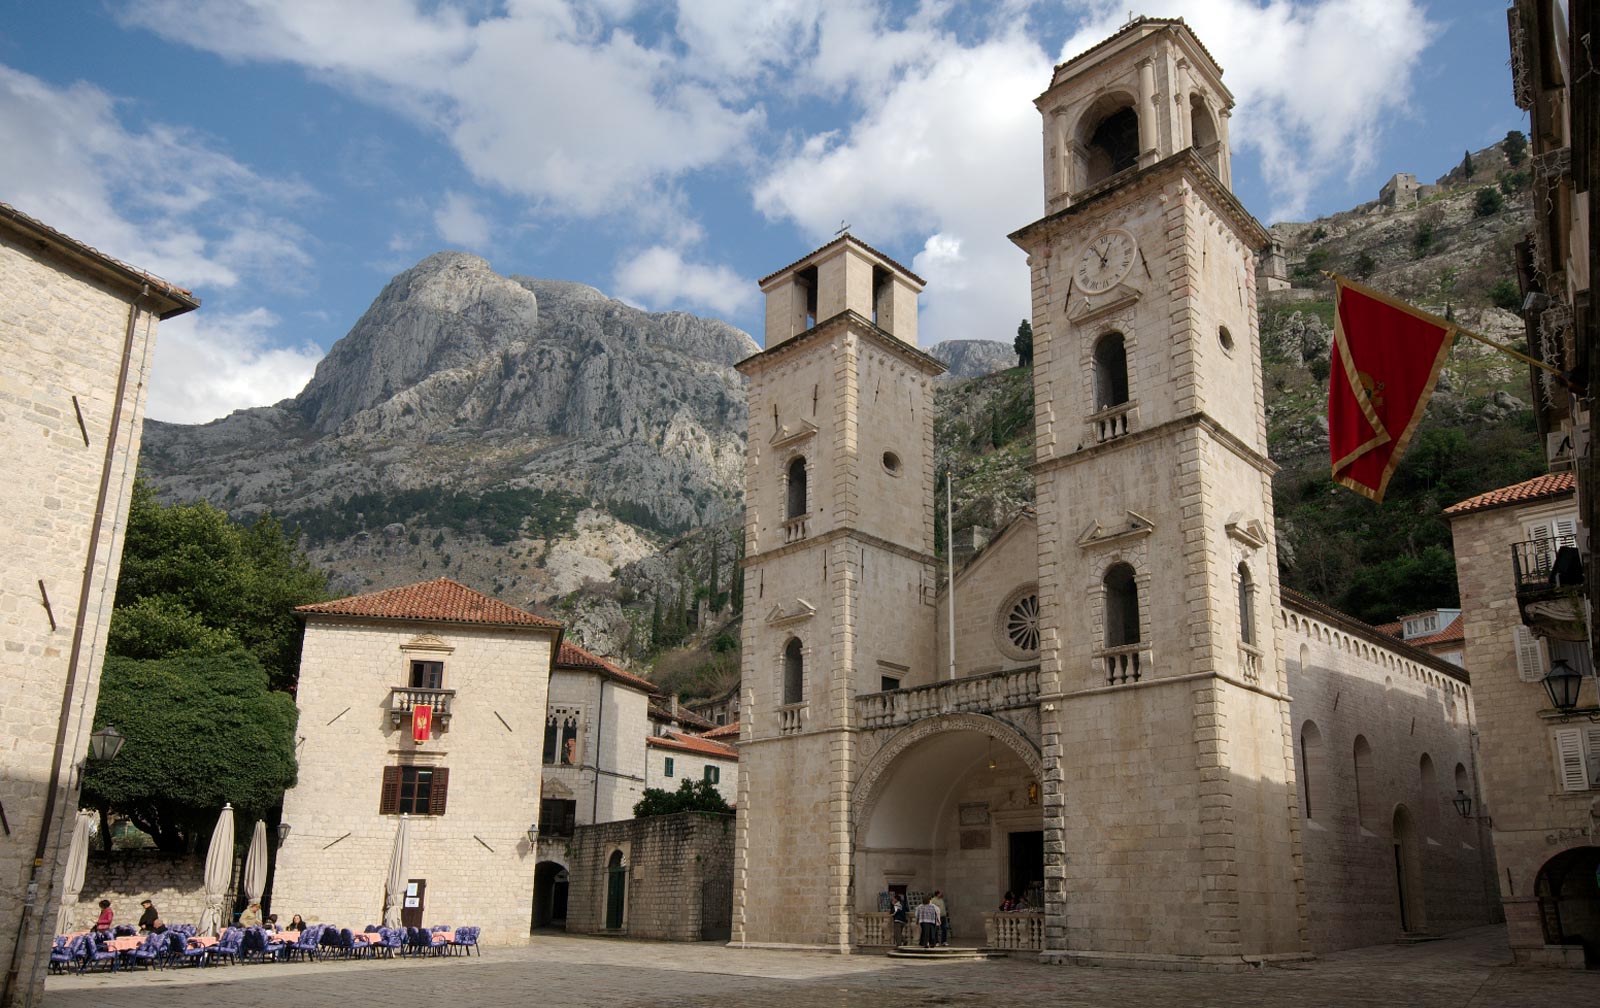 St. Tryphon Cathedral